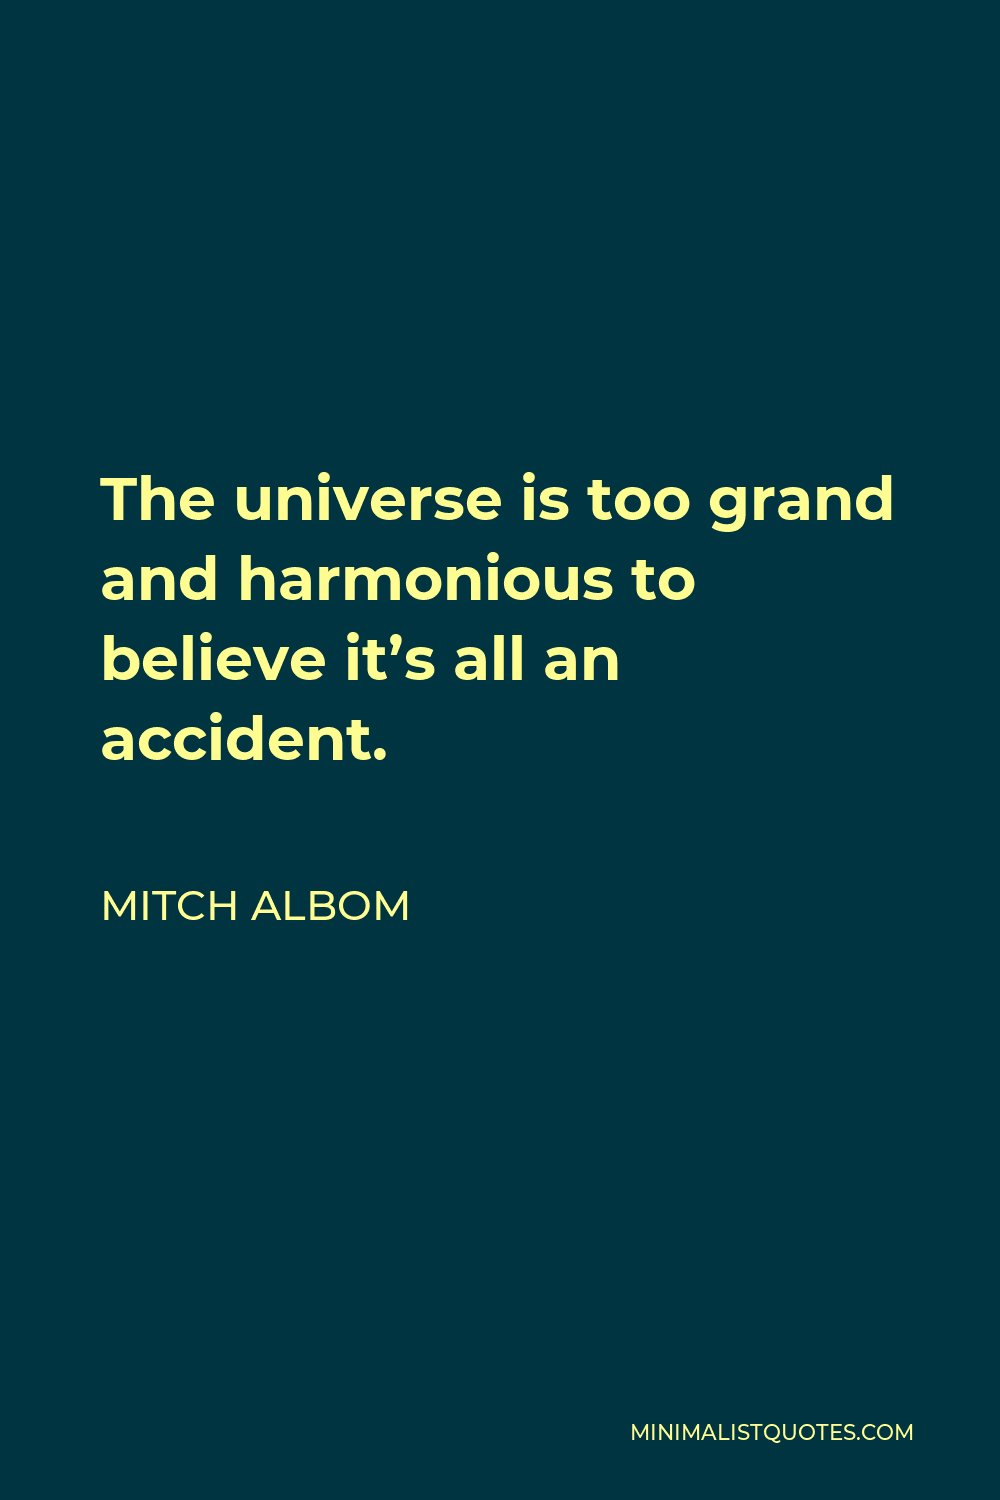 Mitch Albom Quote - The universe is too grand and harmonious to believe it’s all an accident.